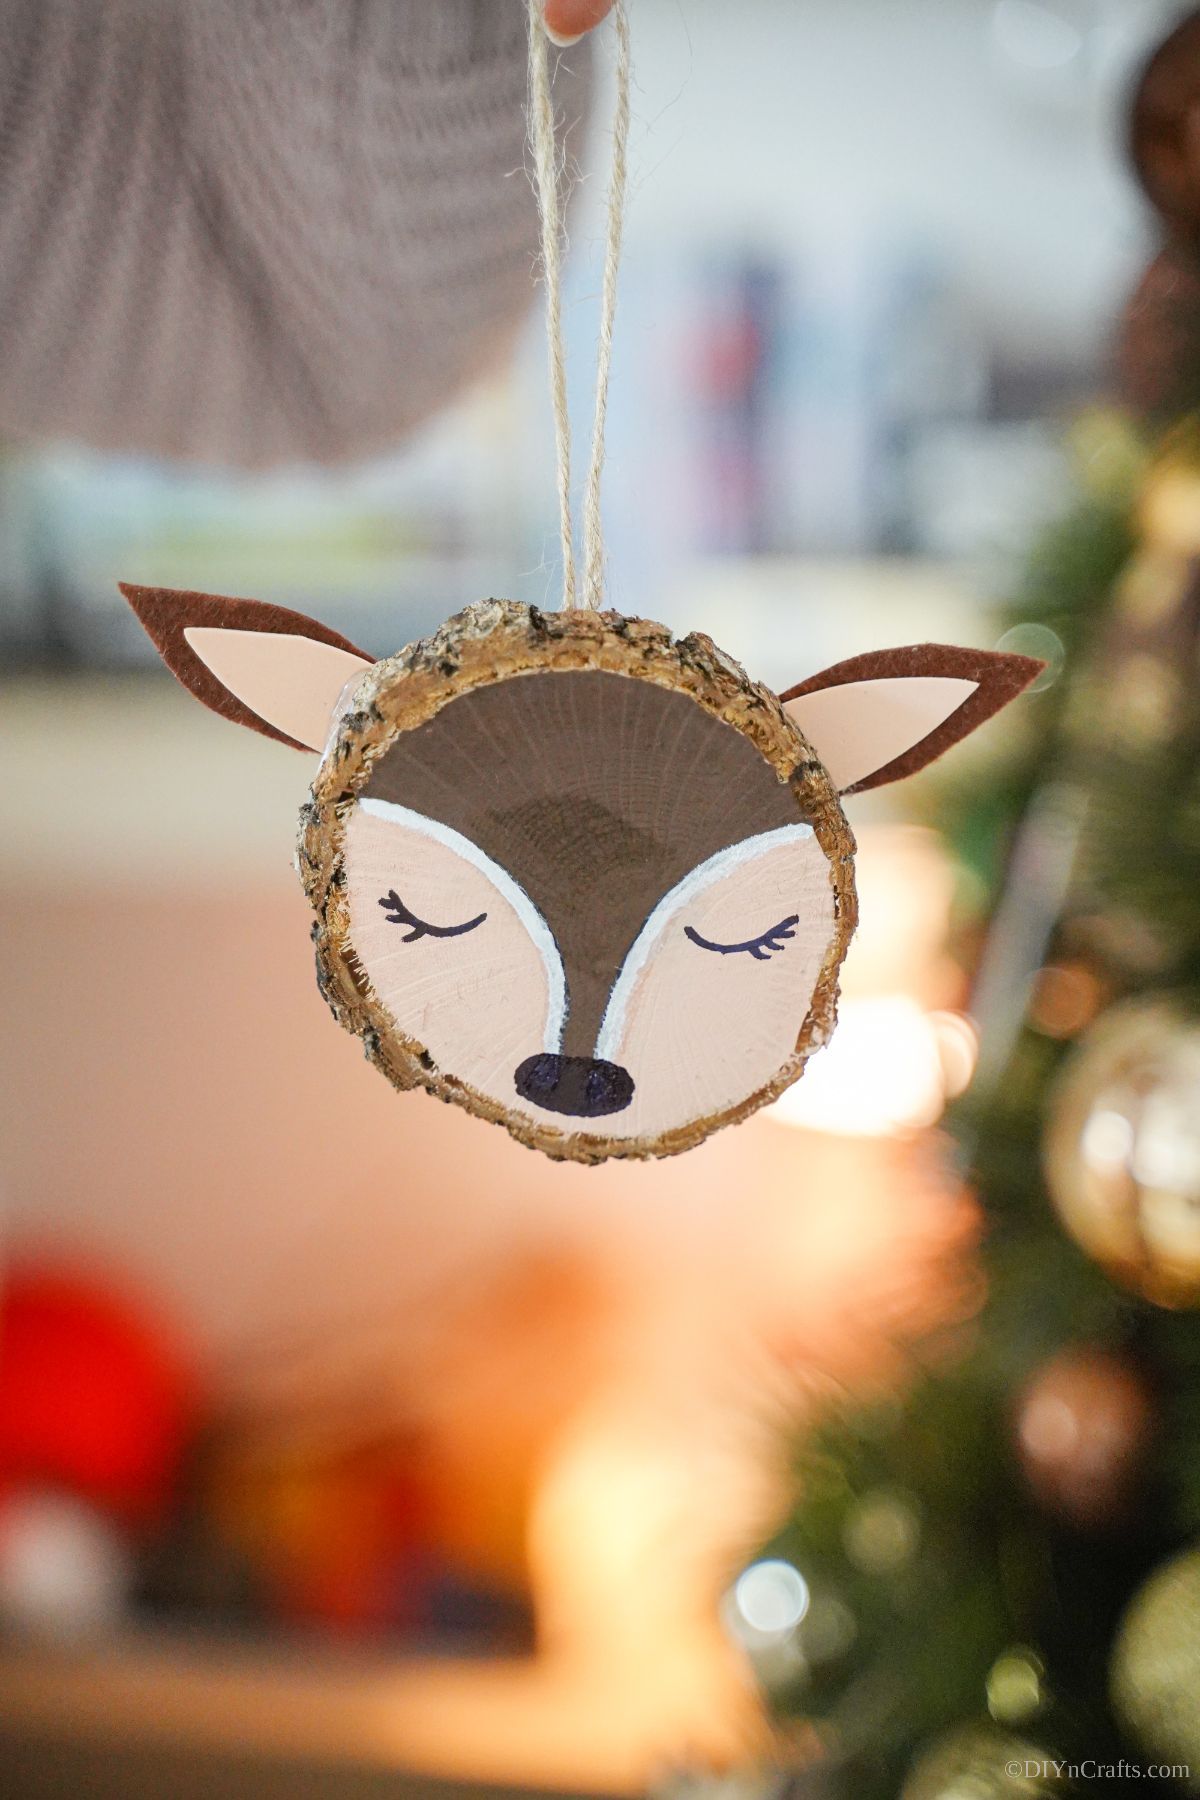 painted wood slice ornament being held in front of tree